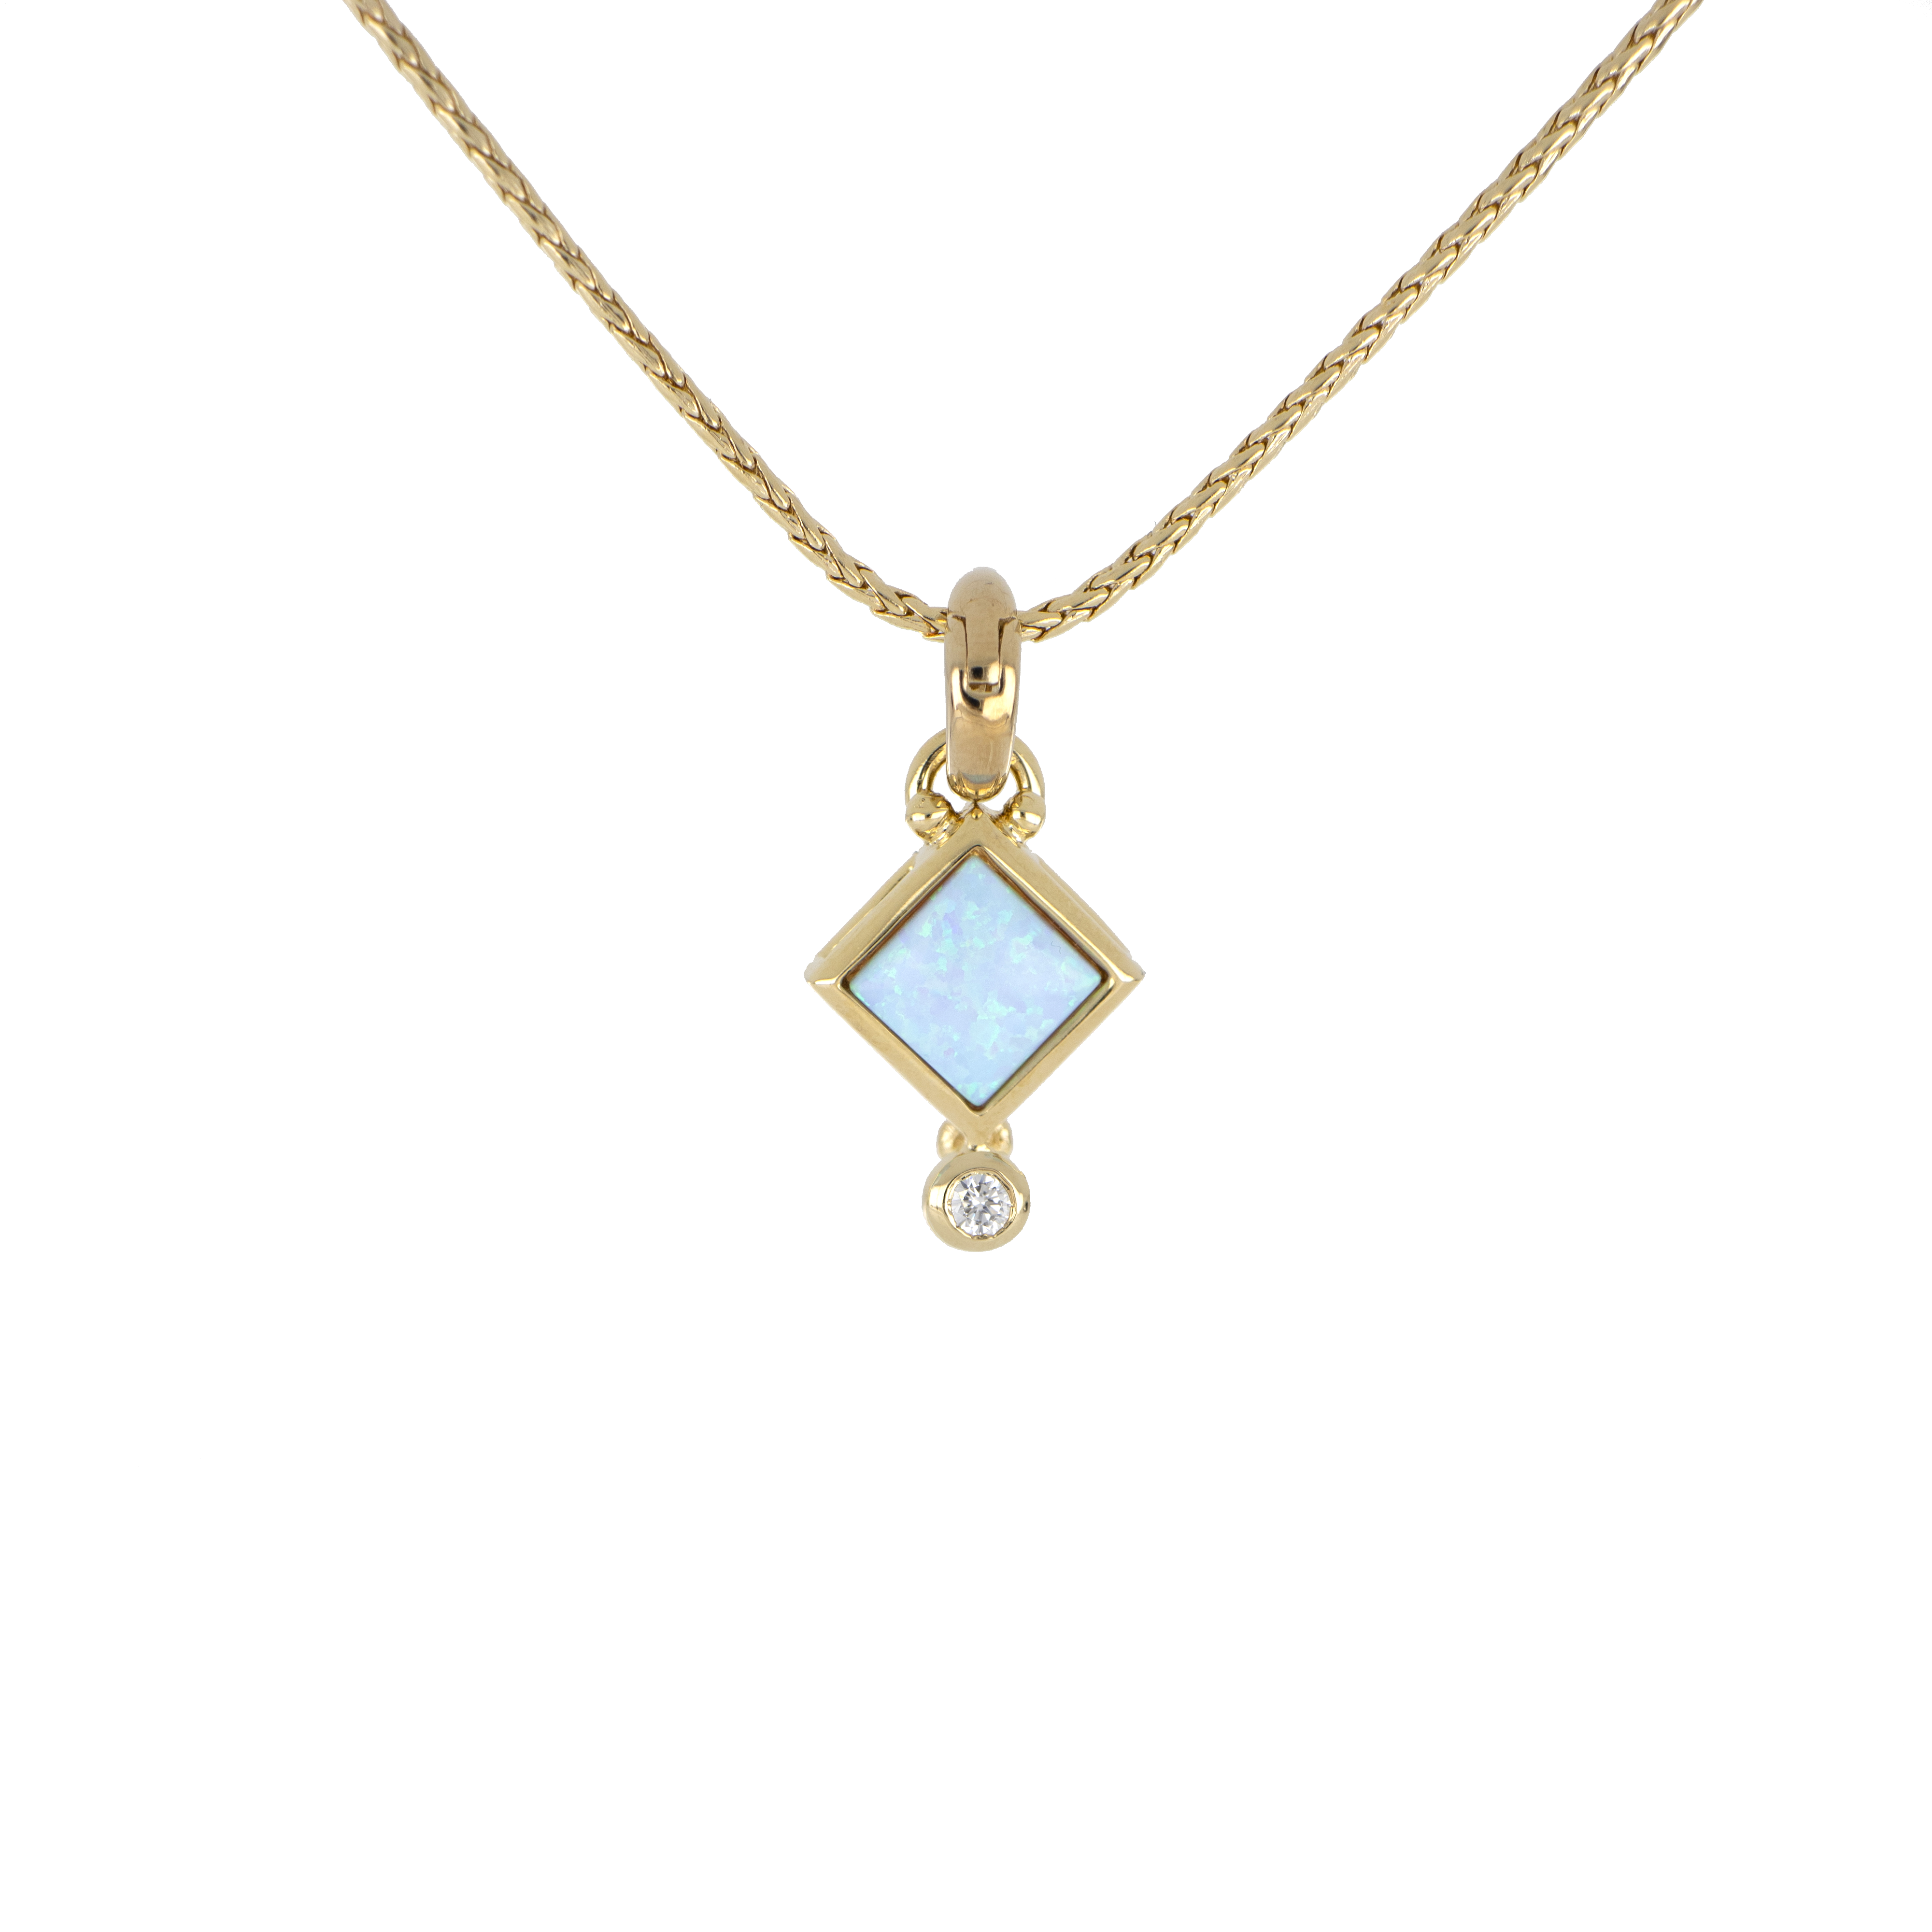 Opalas do Mar Collection - Blue Diamond Opal Pendant with Chain – John  Medeiros Jewelry Collections